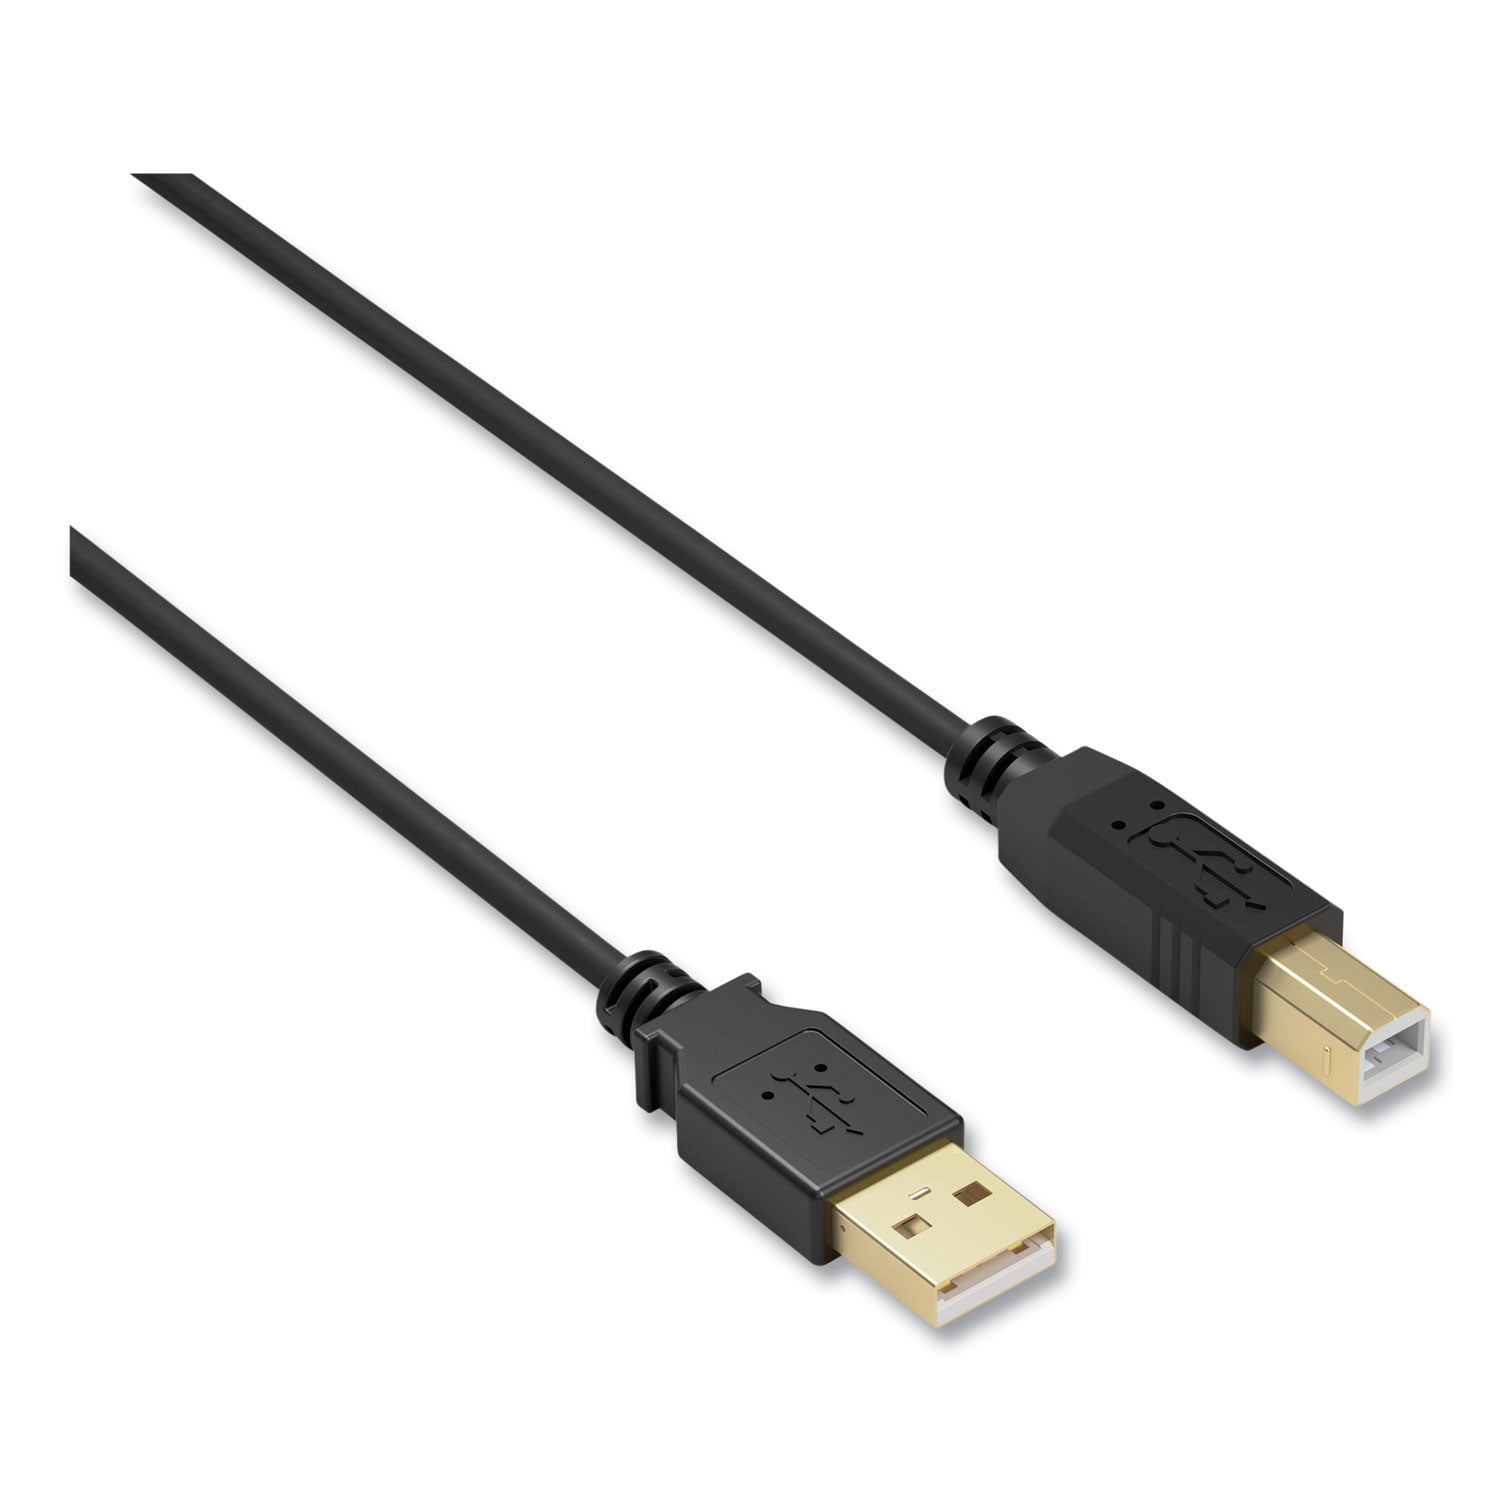 usb-printer-cable-gold-plated-connectors-11-ft-black_nxt24400015 - 1